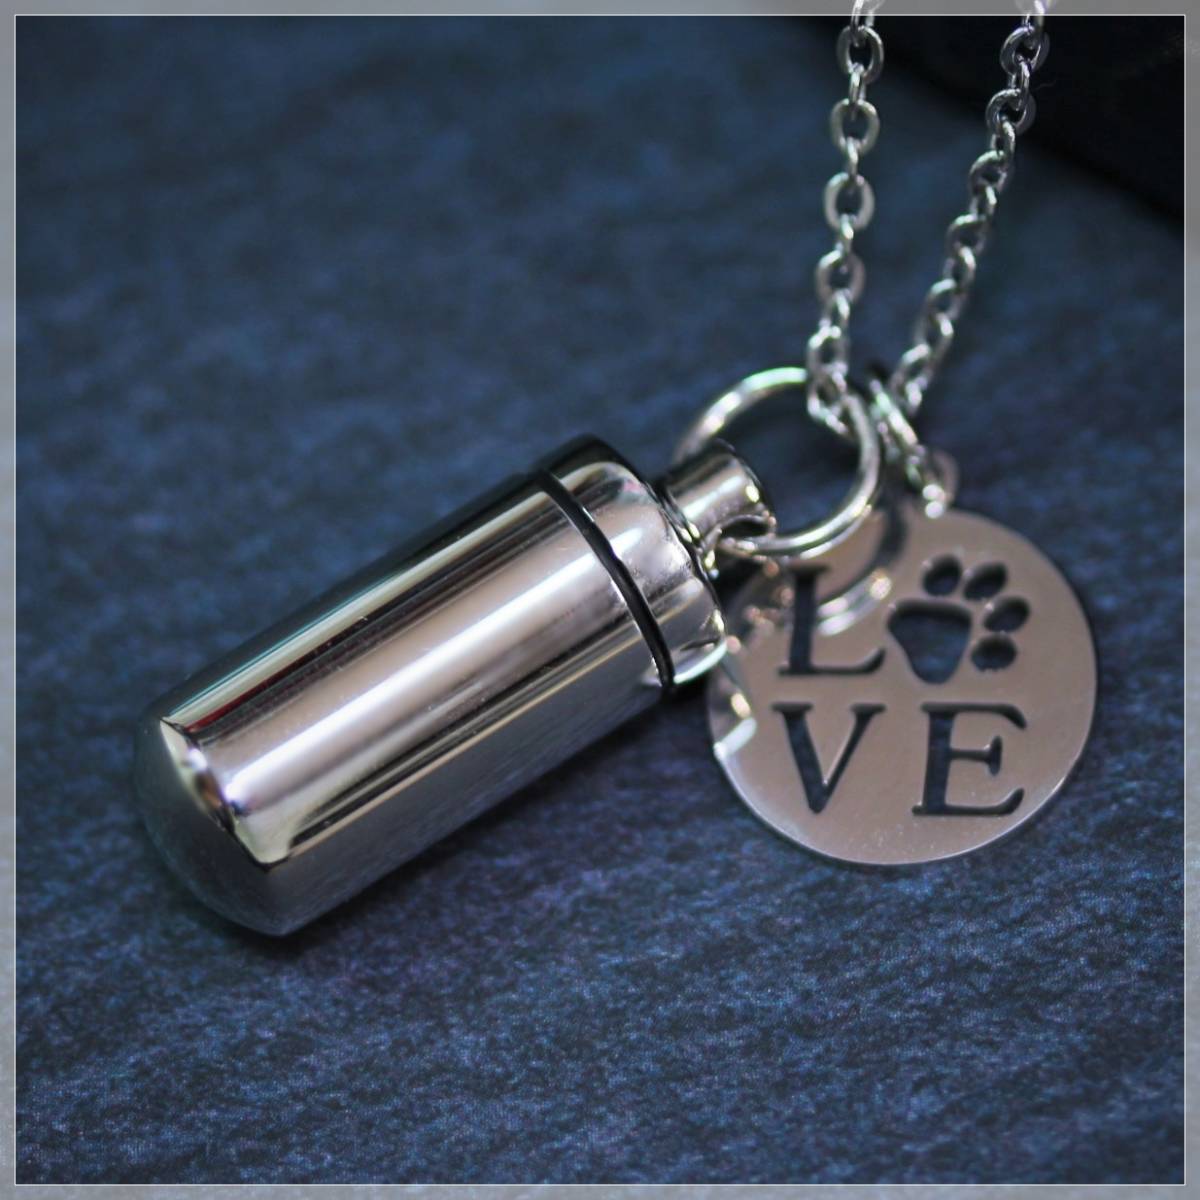 KP7833/ made of stainless steel memorial pendant Mini Capsule necklace Caro -to pendant ... ash .. shape see love dog love cat pet at hand ..